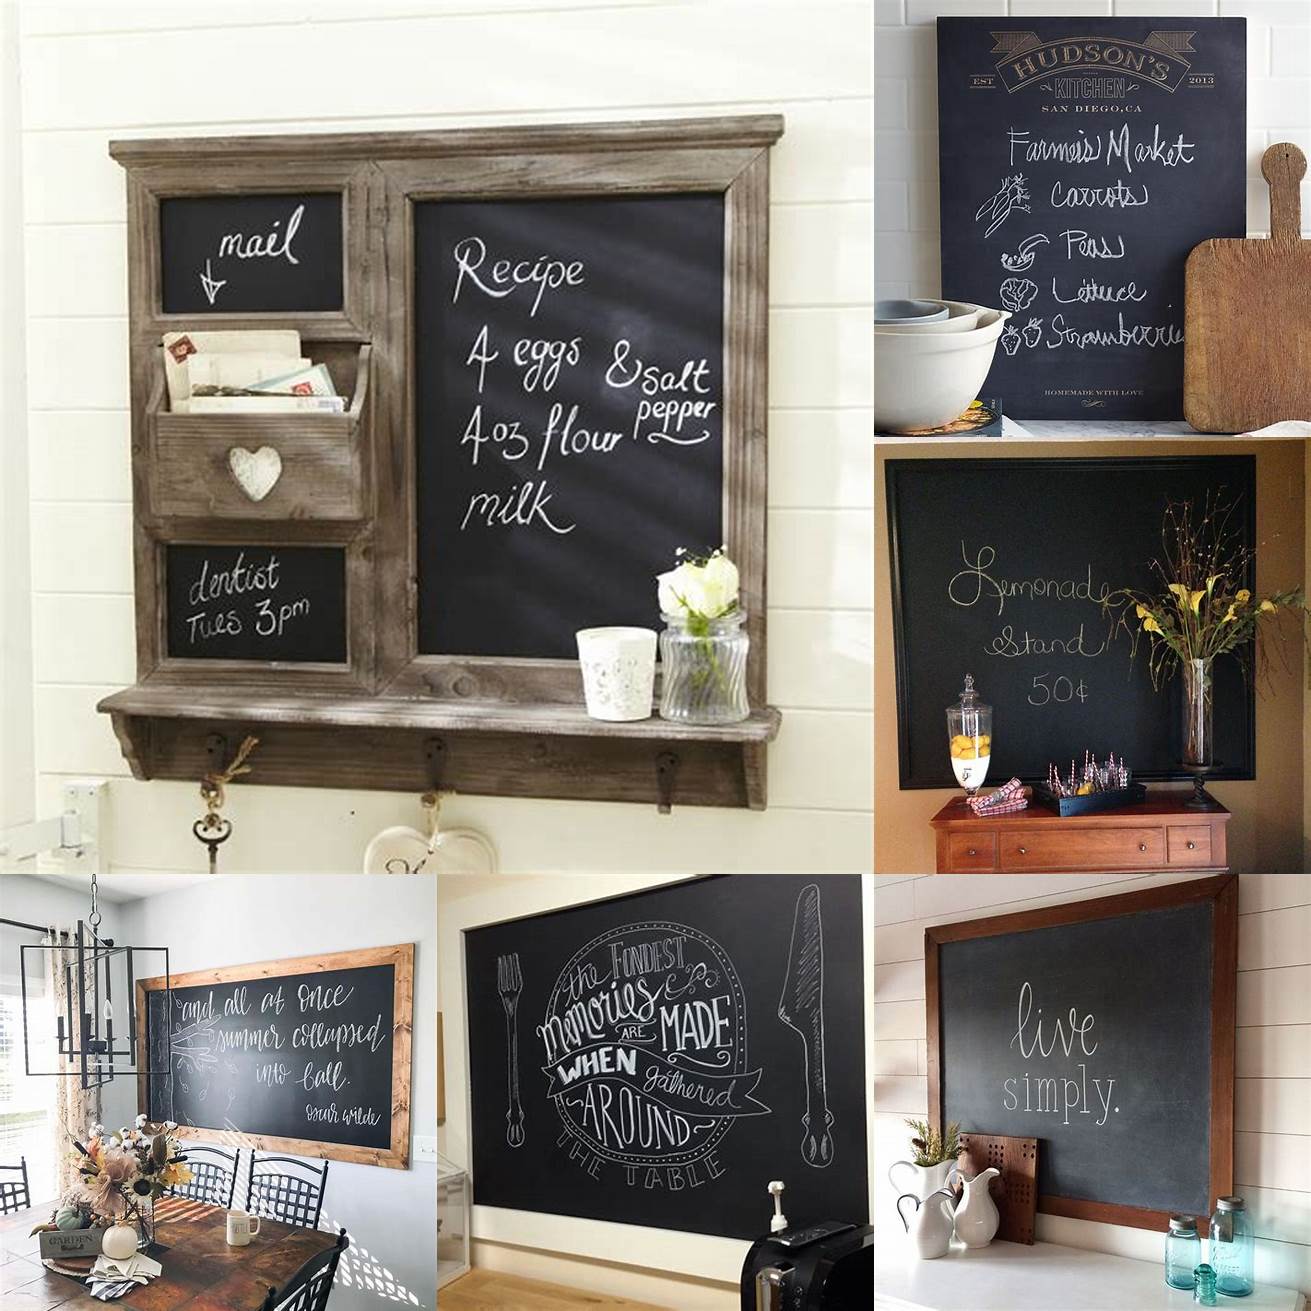 Use the kitchen chalkboard for leaving messages and notes for family members Whether its a reminder to take out the trash or a love note for your spouse the chalkboard is a great way to communicate with your family